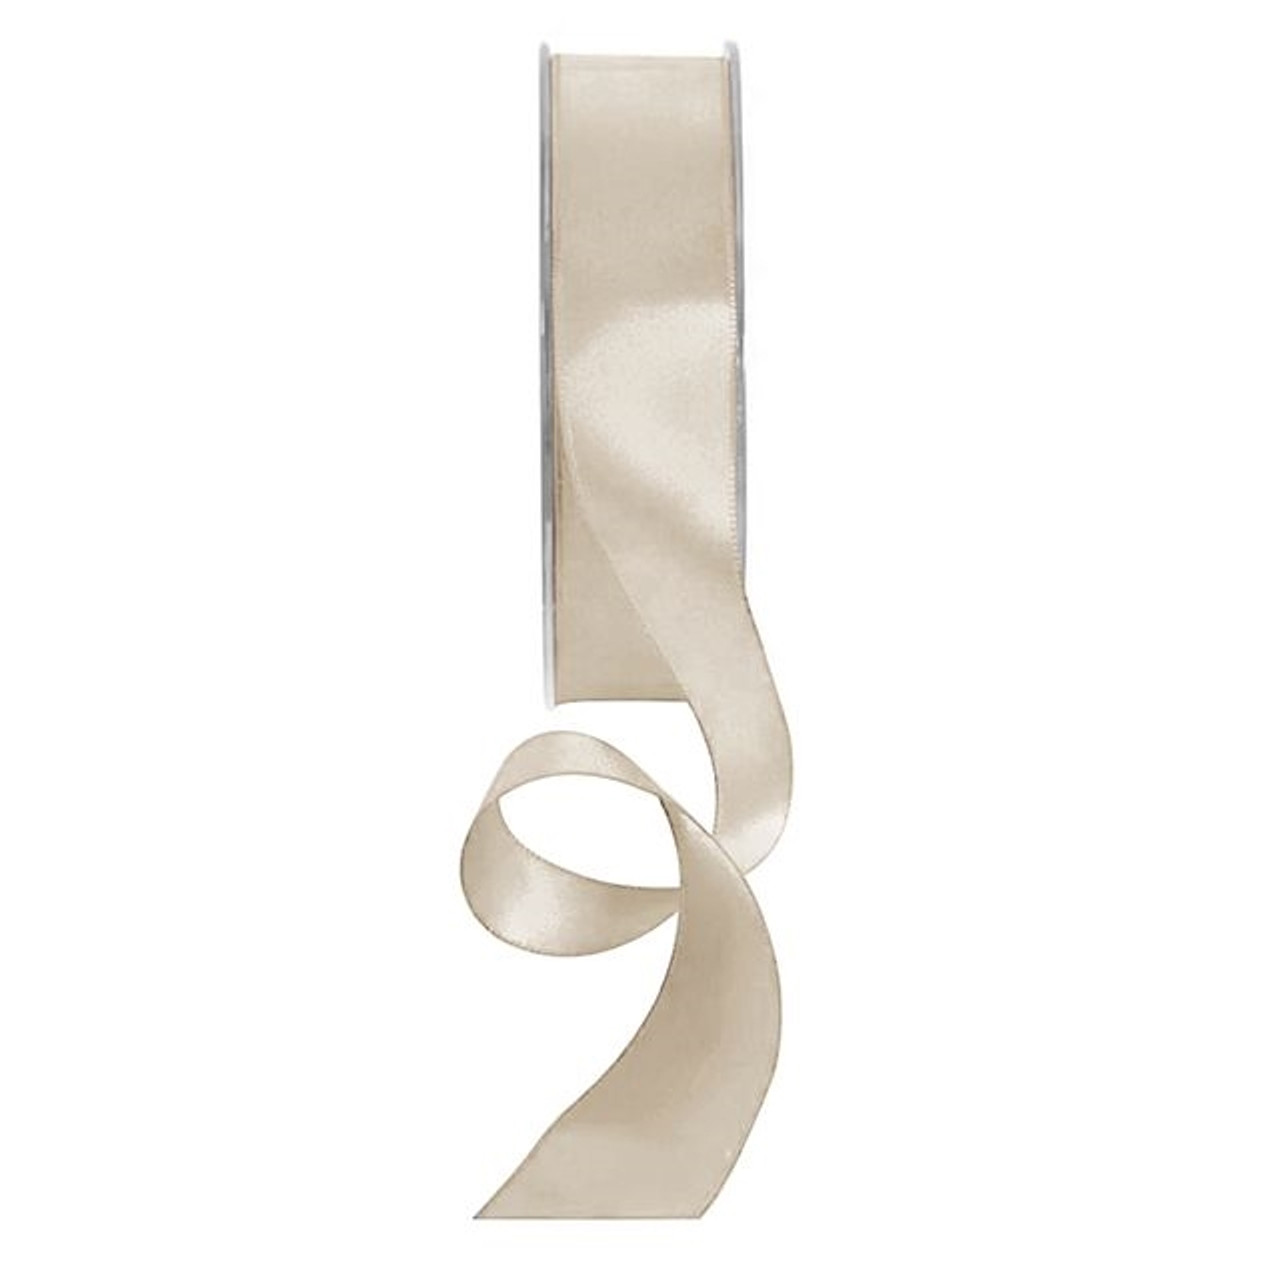 38mm x 20m Double Faced White Satin Ribbon